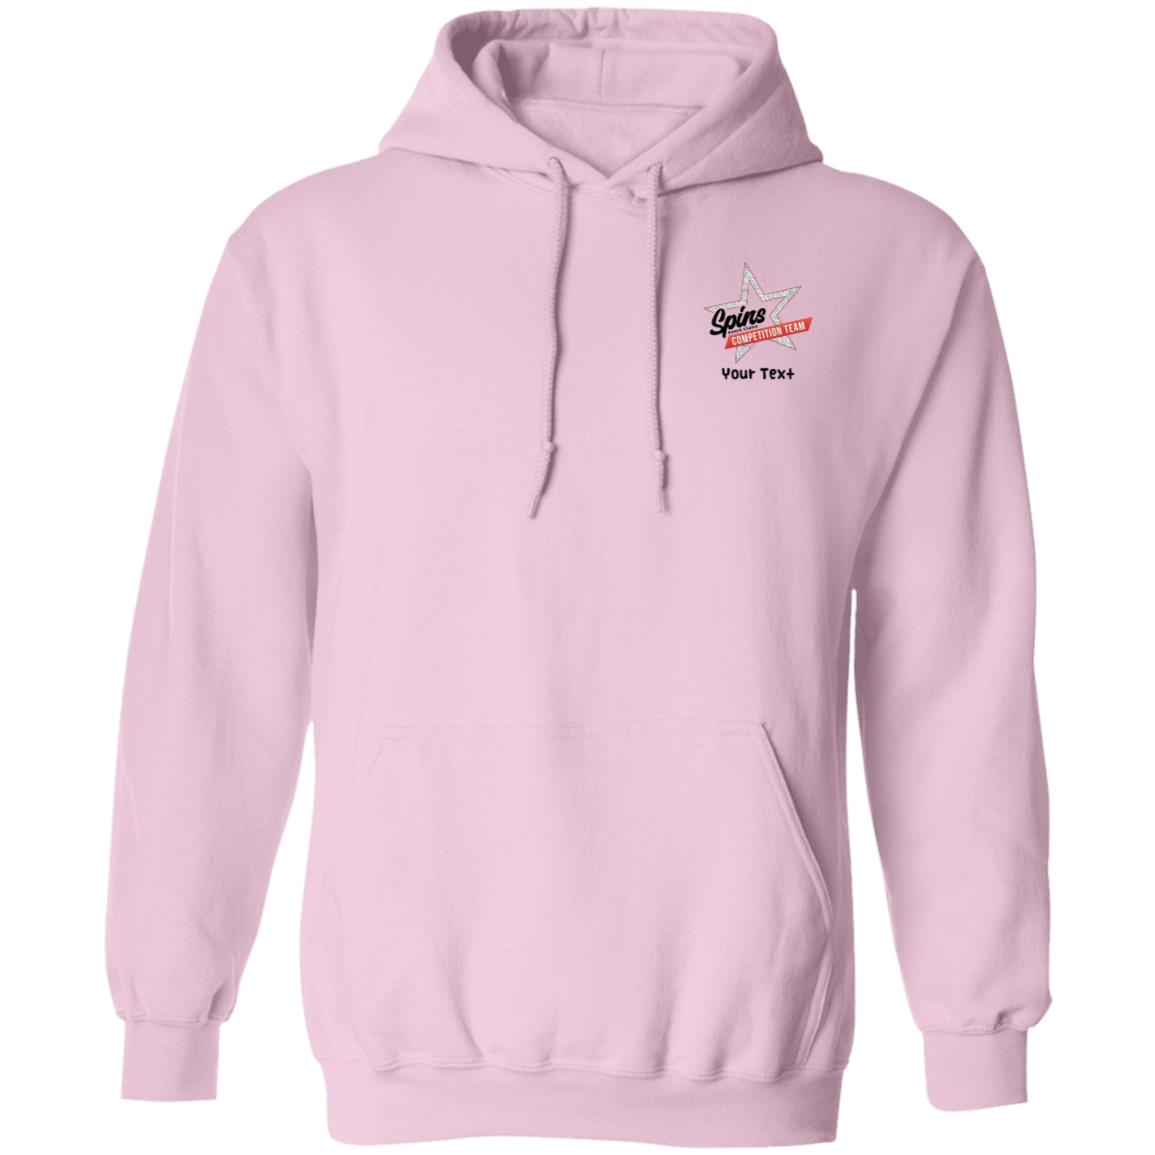 Spins Competition Team Pullover Hoodie - With Personalization